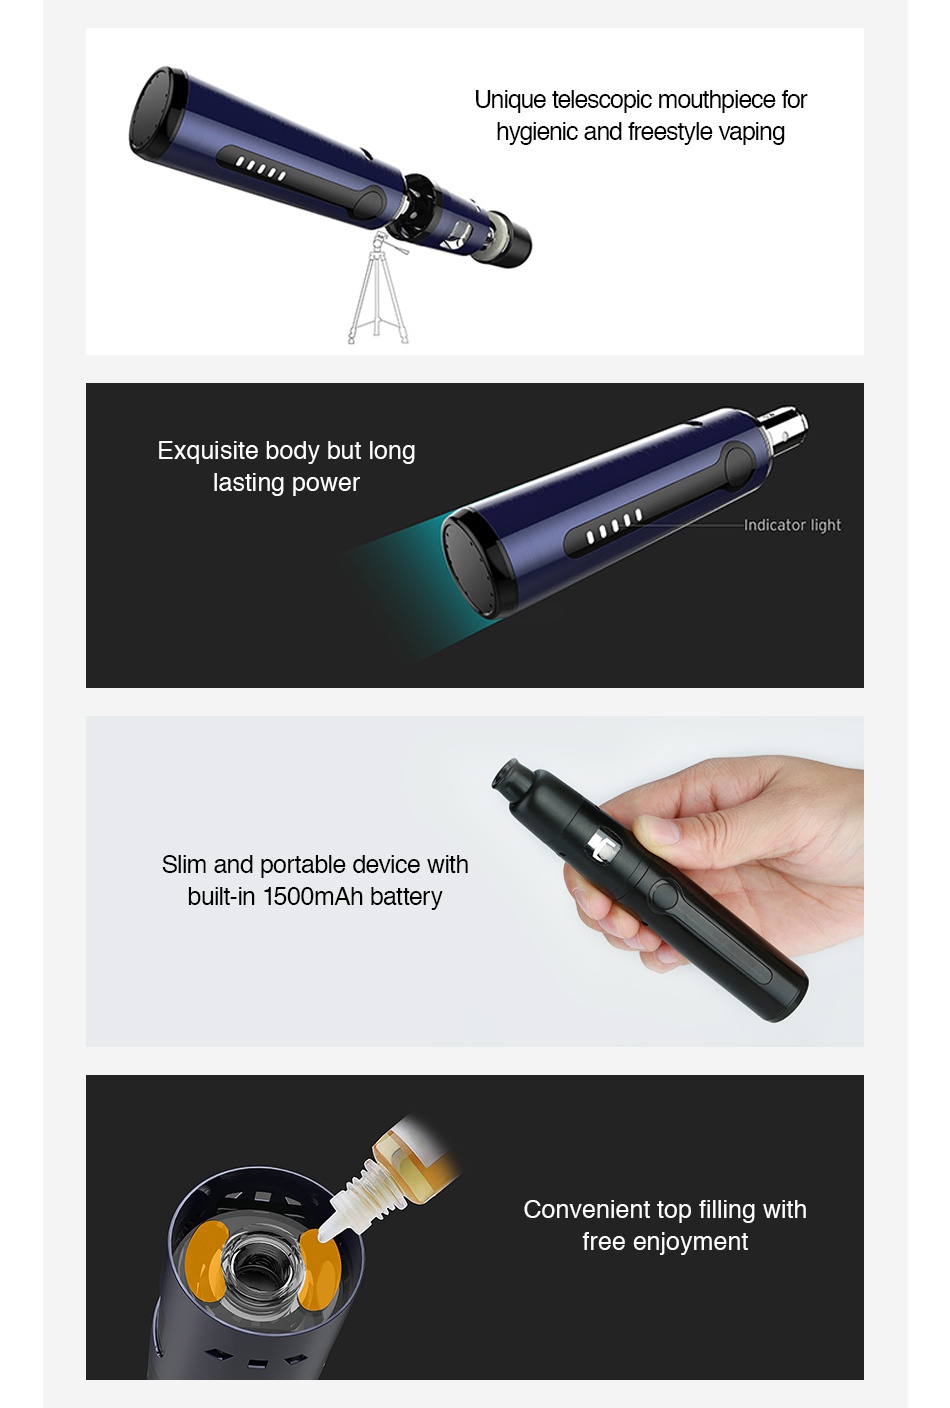 Kangertech K-PIN Mini Starter Kit 1500mAh Unique telescopic mouthpiece for hygienic and freestyle vaping Exquisite body but long lasting power Indicator light Slim and portable device with built in 1500mAh battery Convenient top filling with free enjoyment